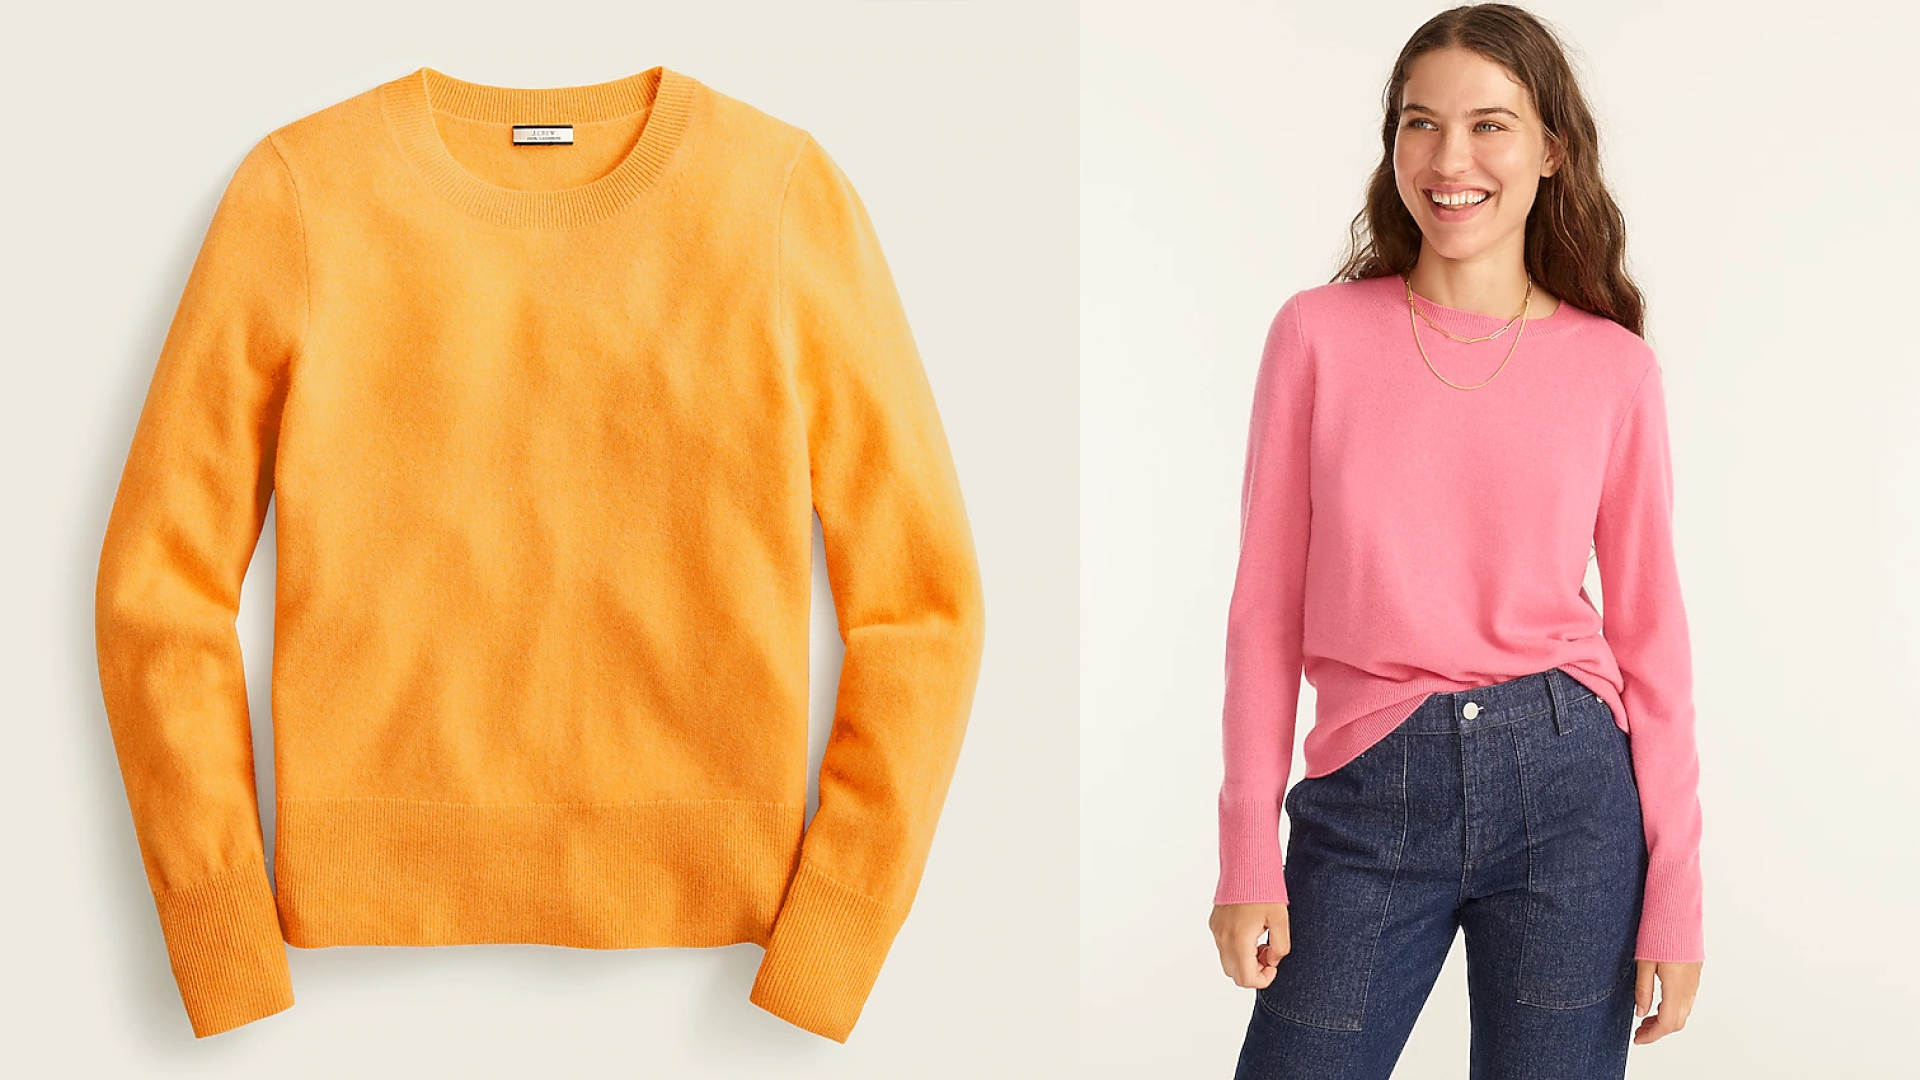 A sustainably made cashmere sweater